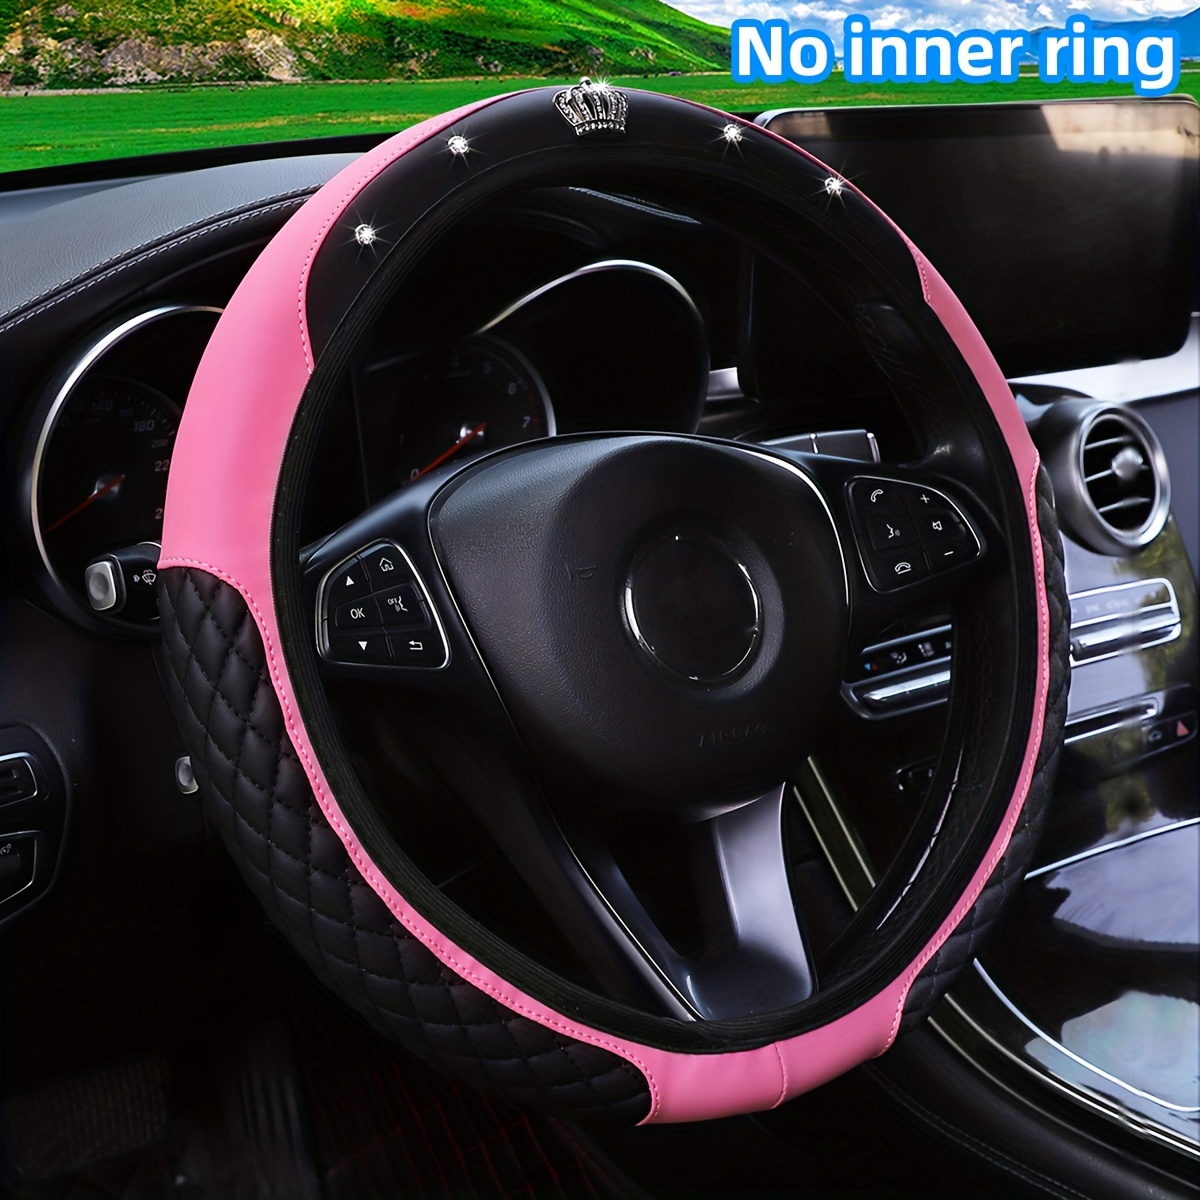 

Crown Artificial Diamond Glitter Fashion Pu Leather Non-slip No Inner Ring Car Steering Wheel Cover Fit For 37-38cm Steering Wheel Car Accessories